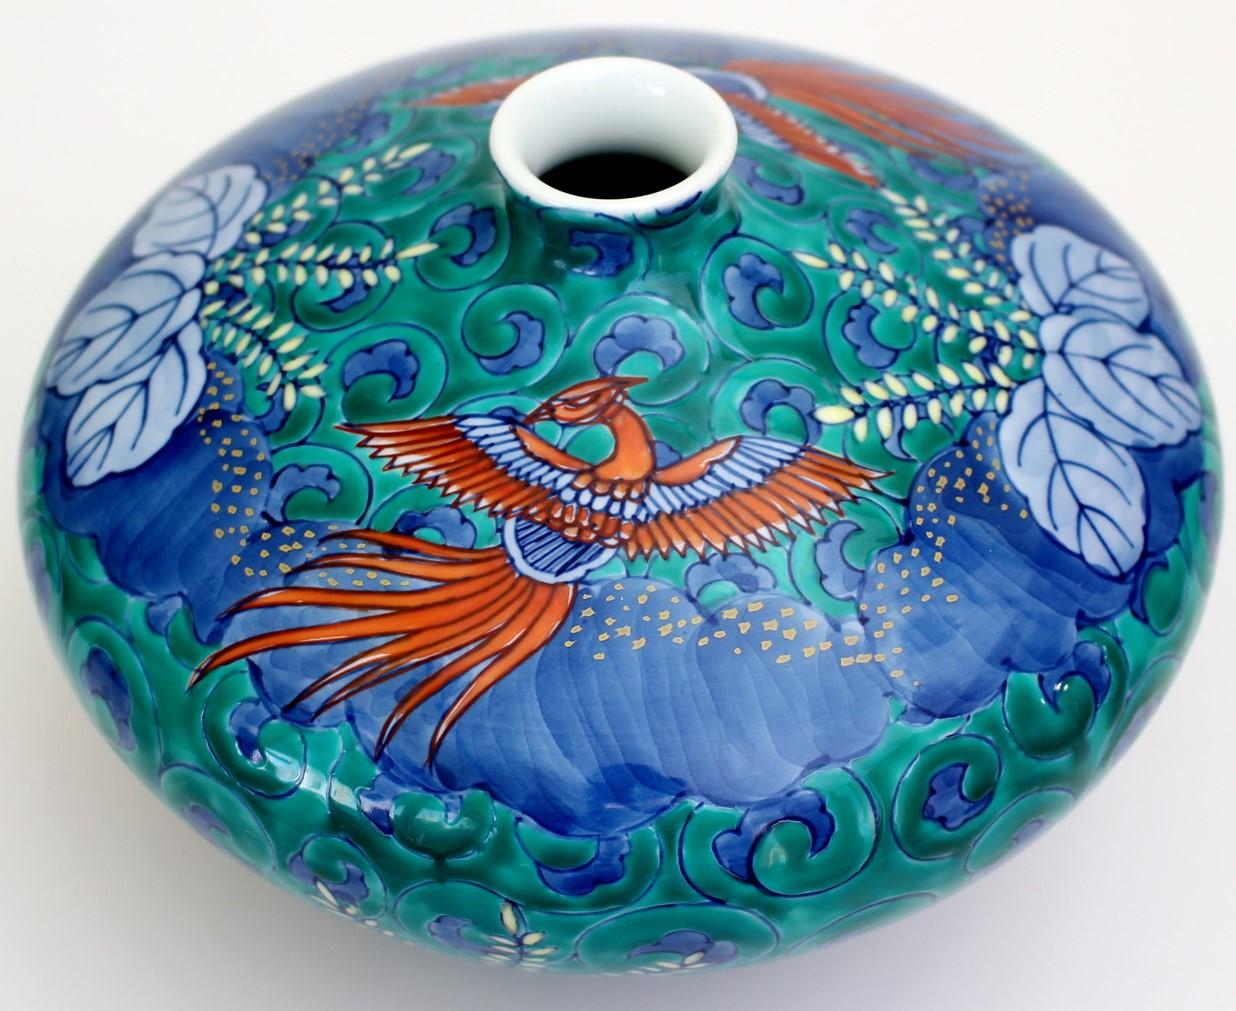 Contemporary Japanese decorative porcelain vase, hand painted in green, red and blue, showcasing phoenixes in vivid red and blue, set against a beloved dice- shaped porcelain body in a striking 